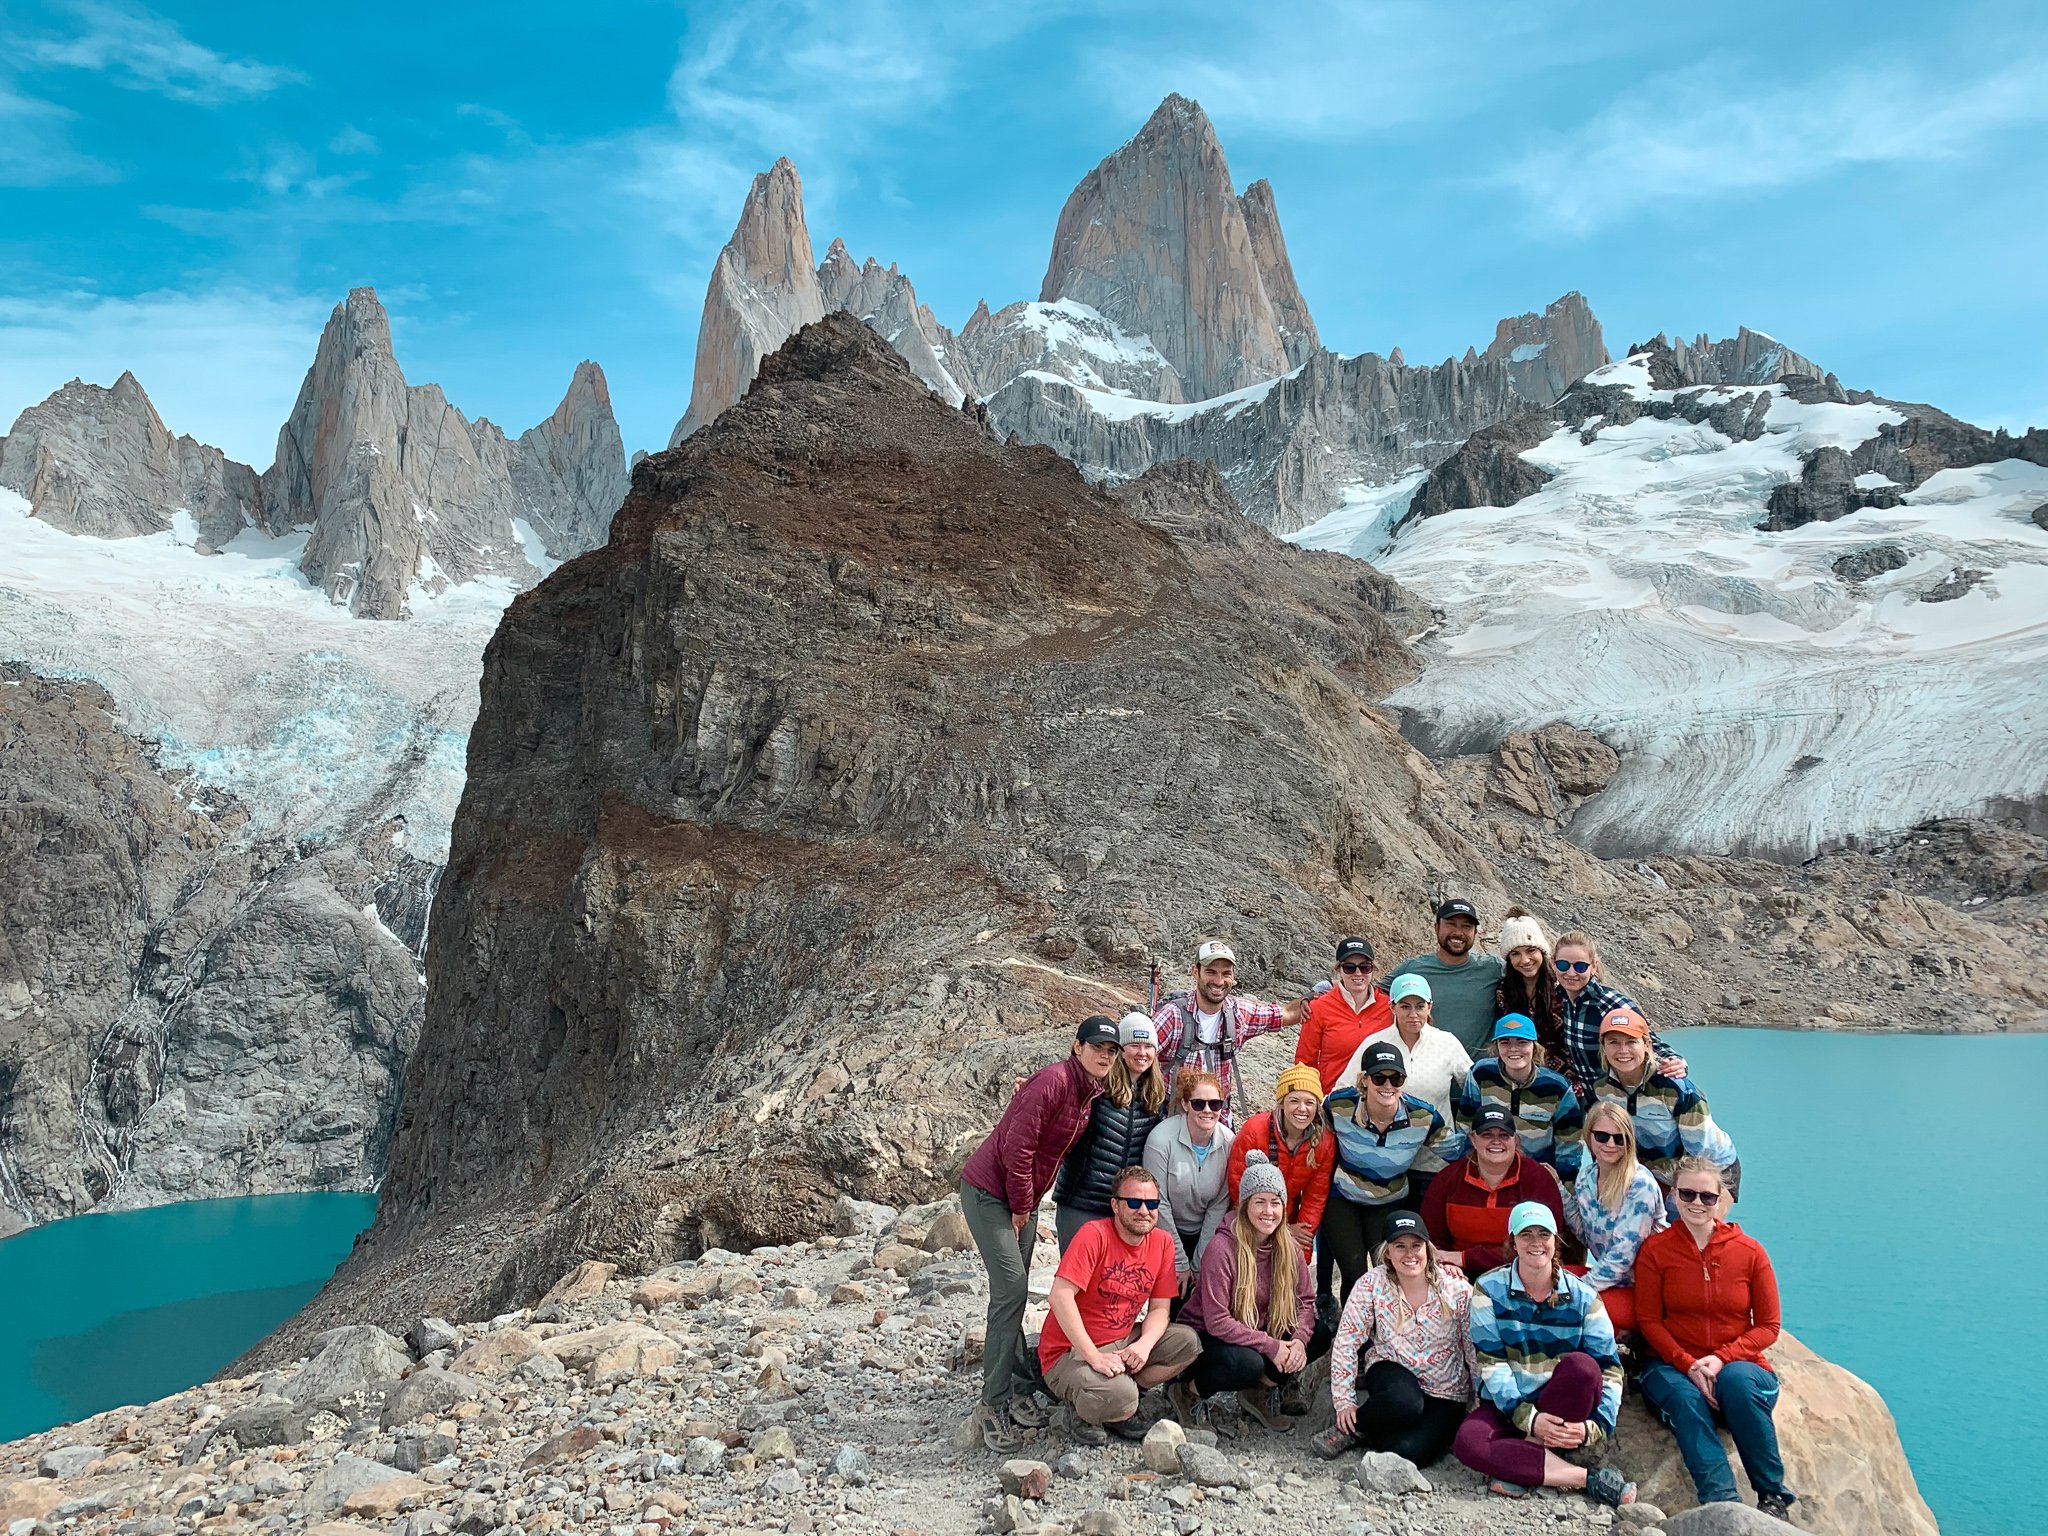 TrovaTrip group of travelers smiling in front of large rock formation with clear blue water below them and snowy mountains behind them in Patagonia